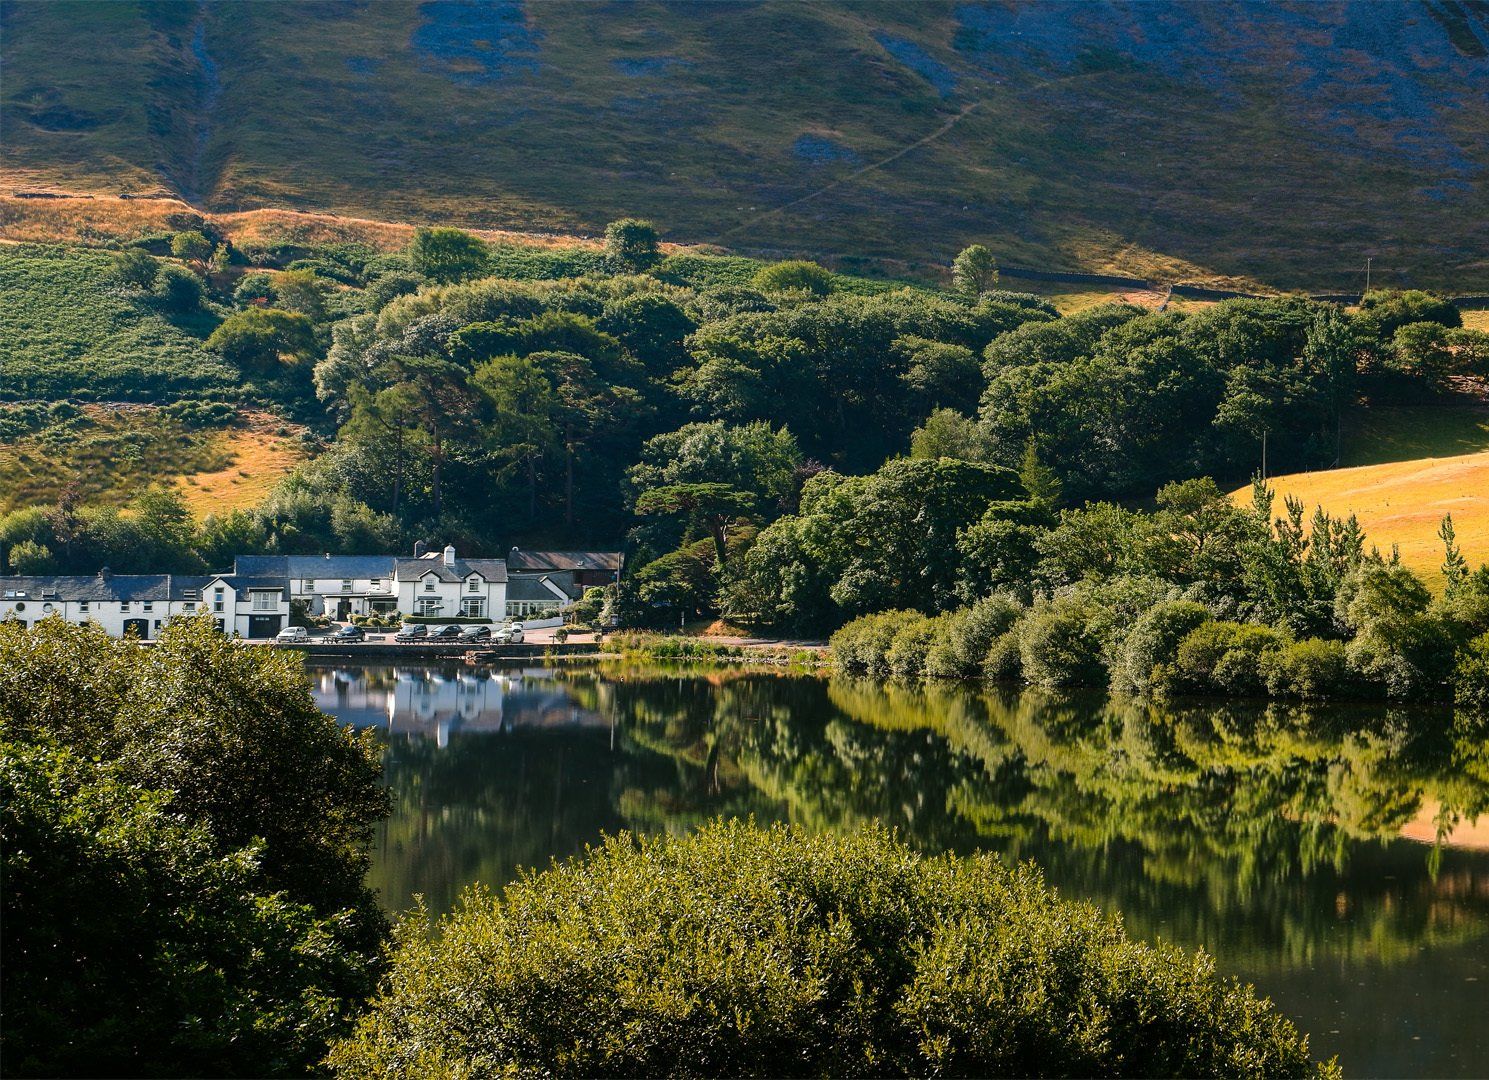 The view of the Ty'n y Cornel Hotel from across the Talyllyn Lake.